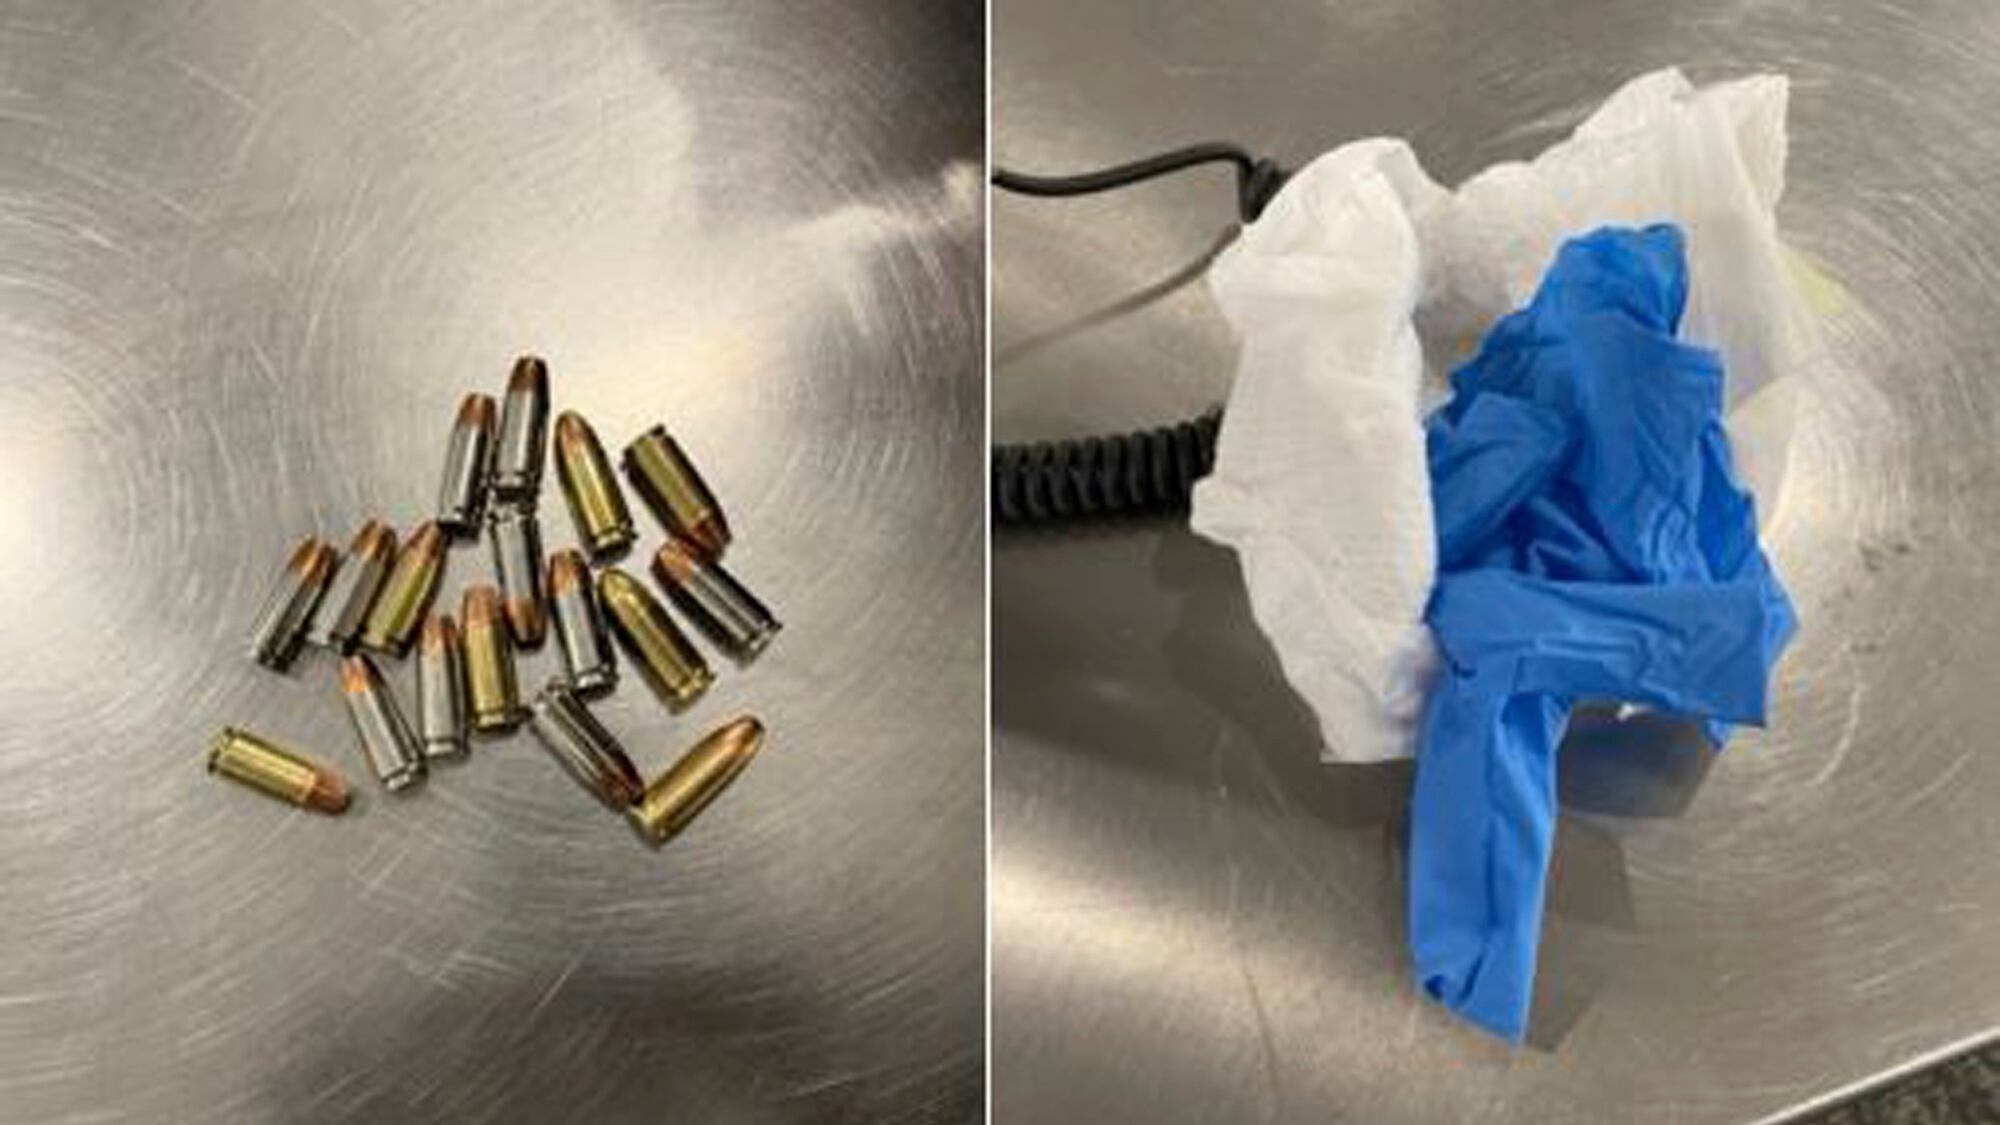 The 17 bullets security officers found concealed inside a disposable baby nappy at LaGuardia Airport in New York (Transportation Security Administration via AP)